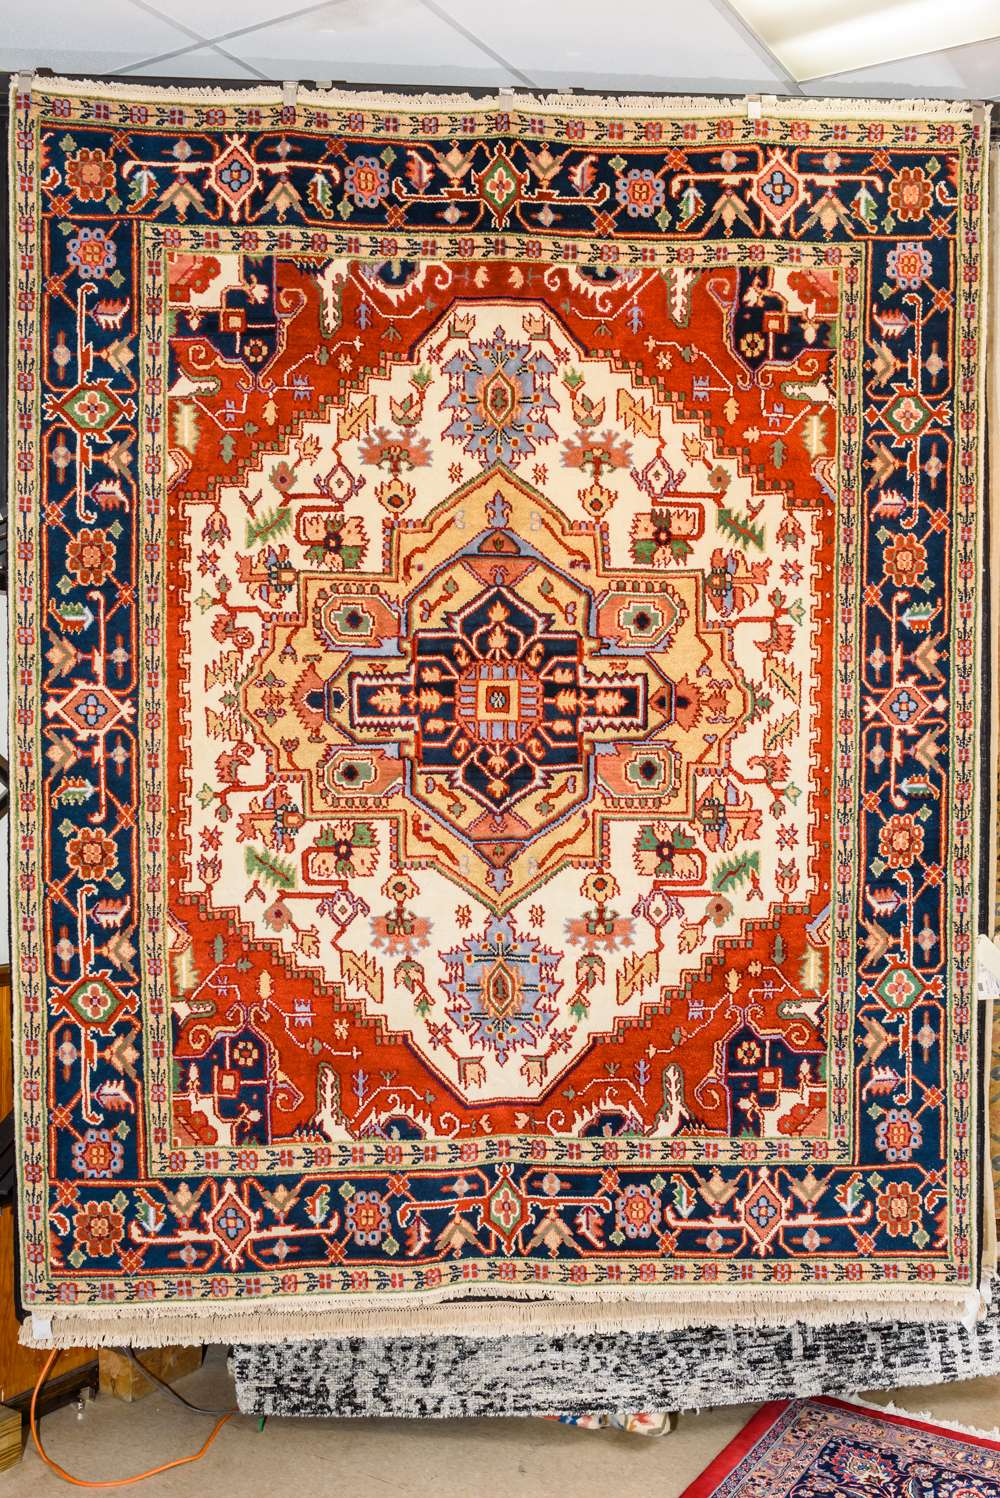 Arefs Oriental Rugs | 1325 Baltimore Pike, Bel Air, MD 21014 | Phone: (410) 879-2270